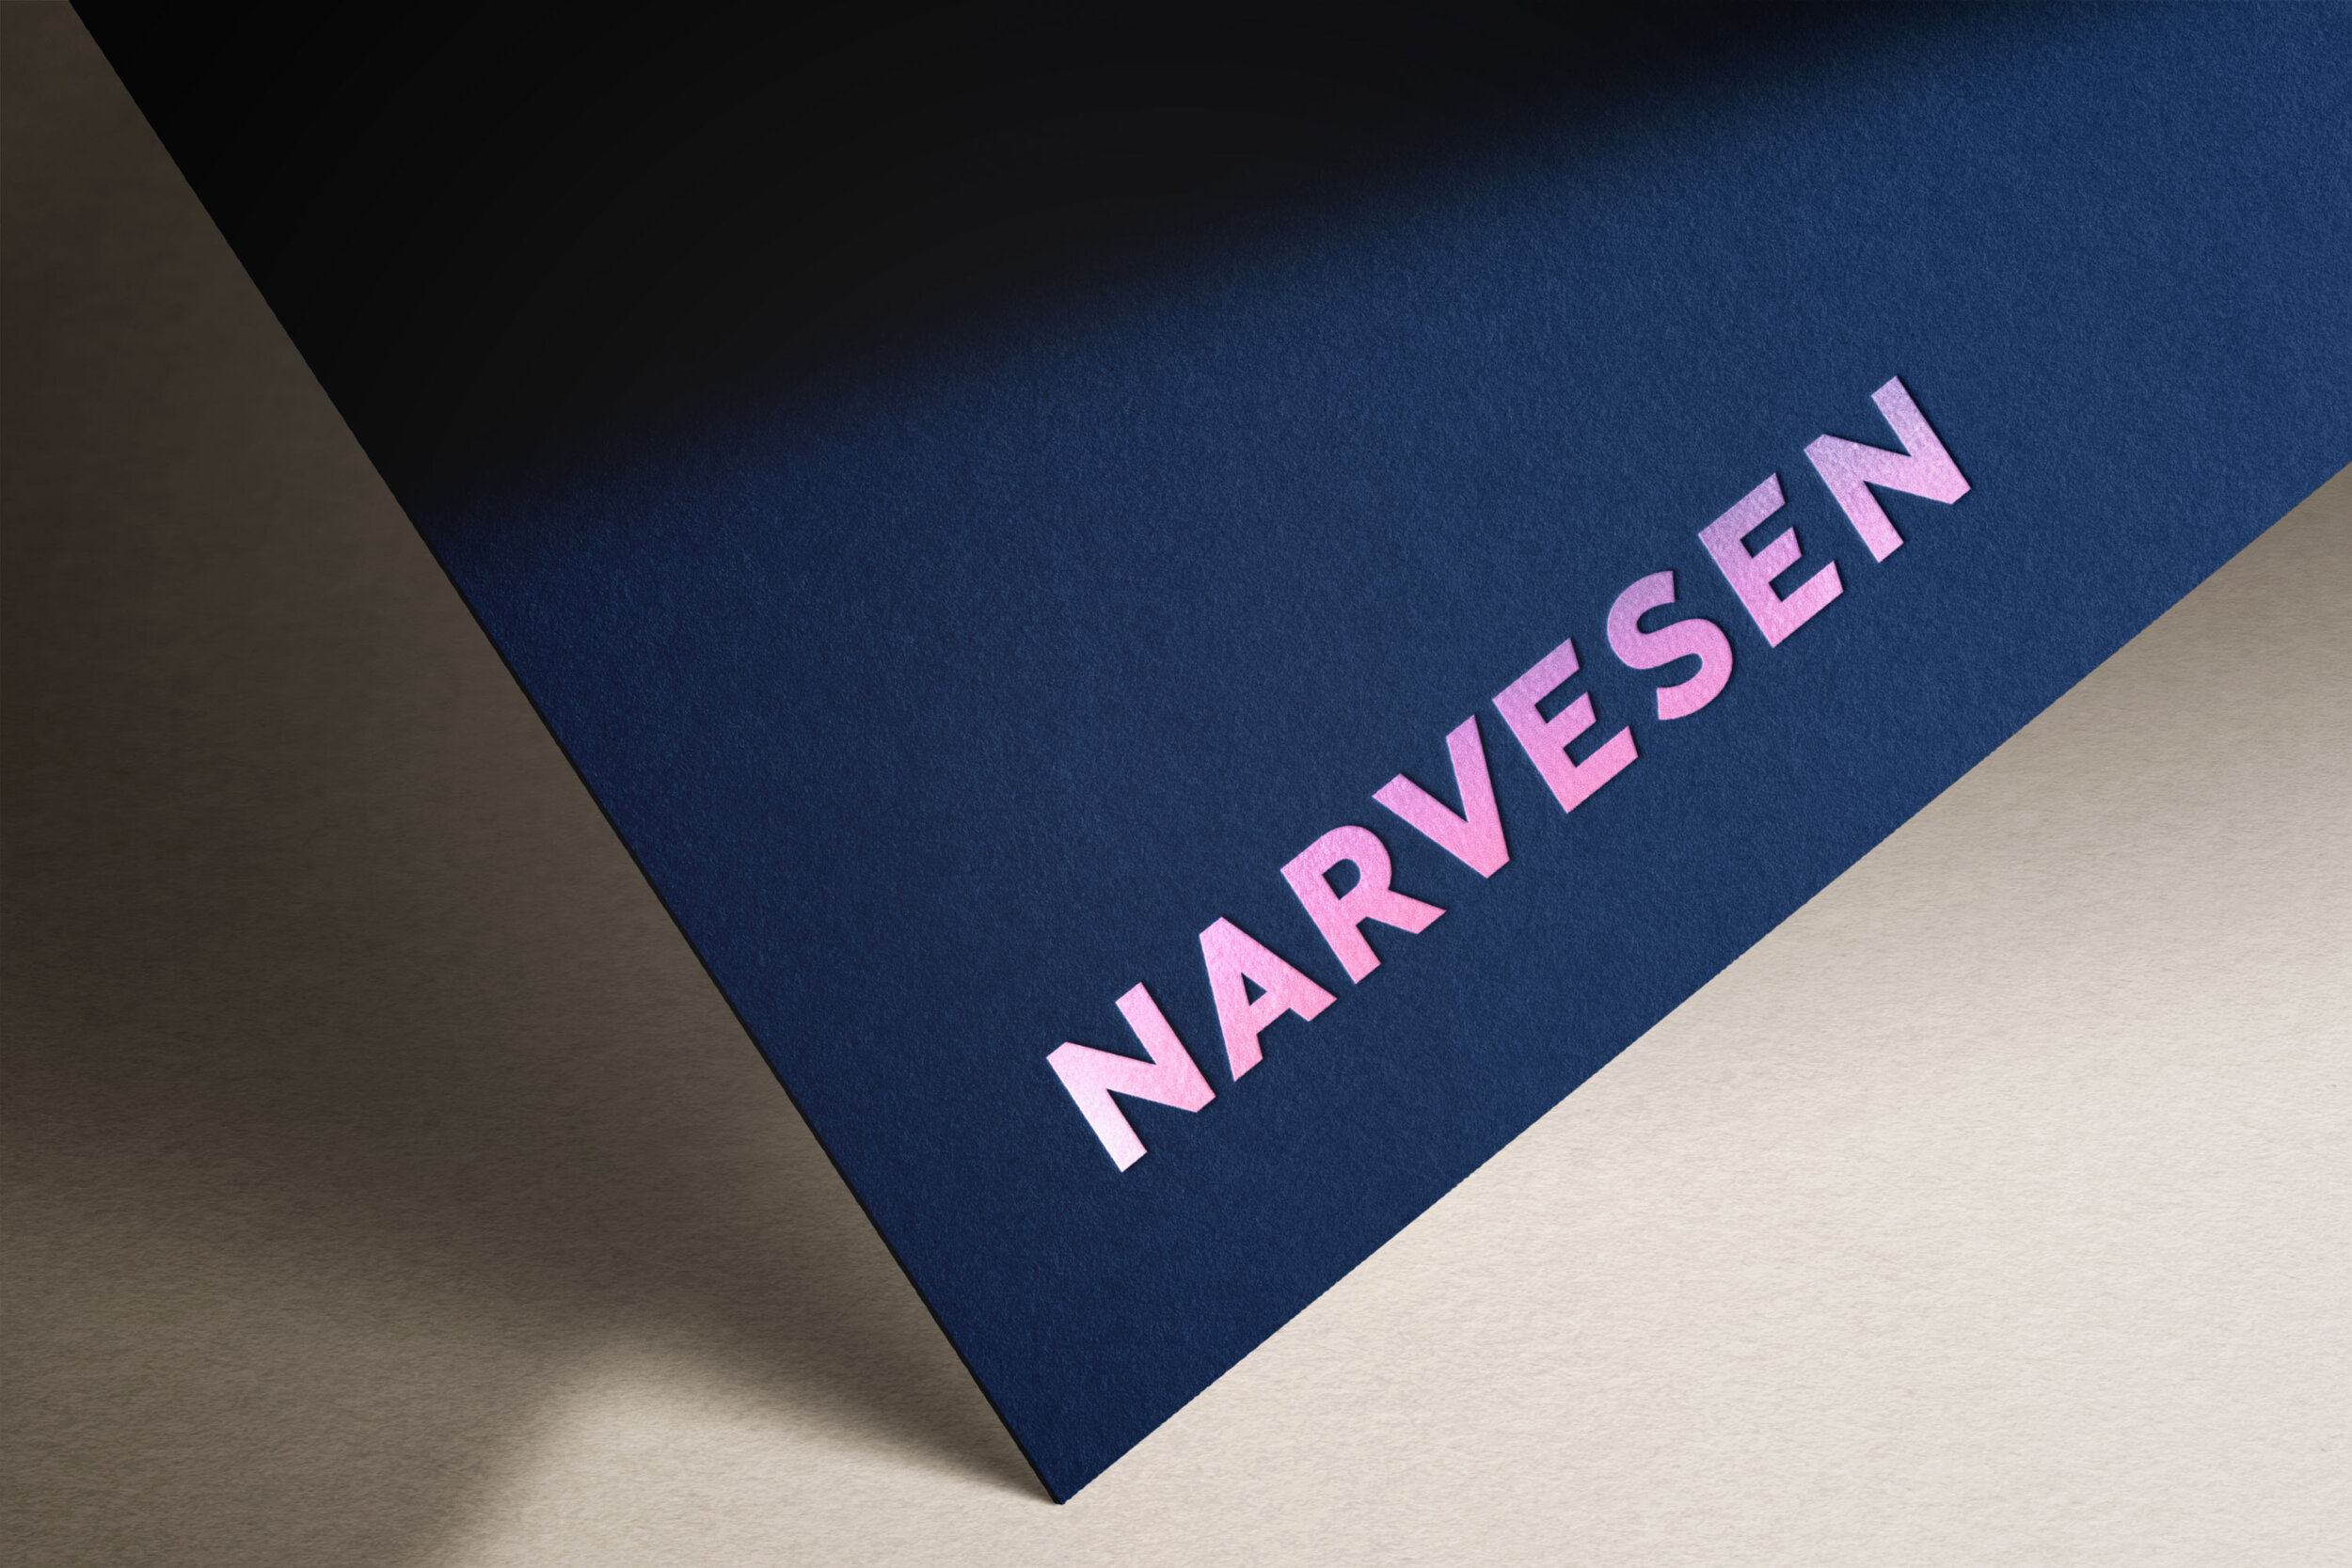 The Narvesen logo can be used on so many different platforms when designed on a visual platform. It creates relationships and strengthens the brand.